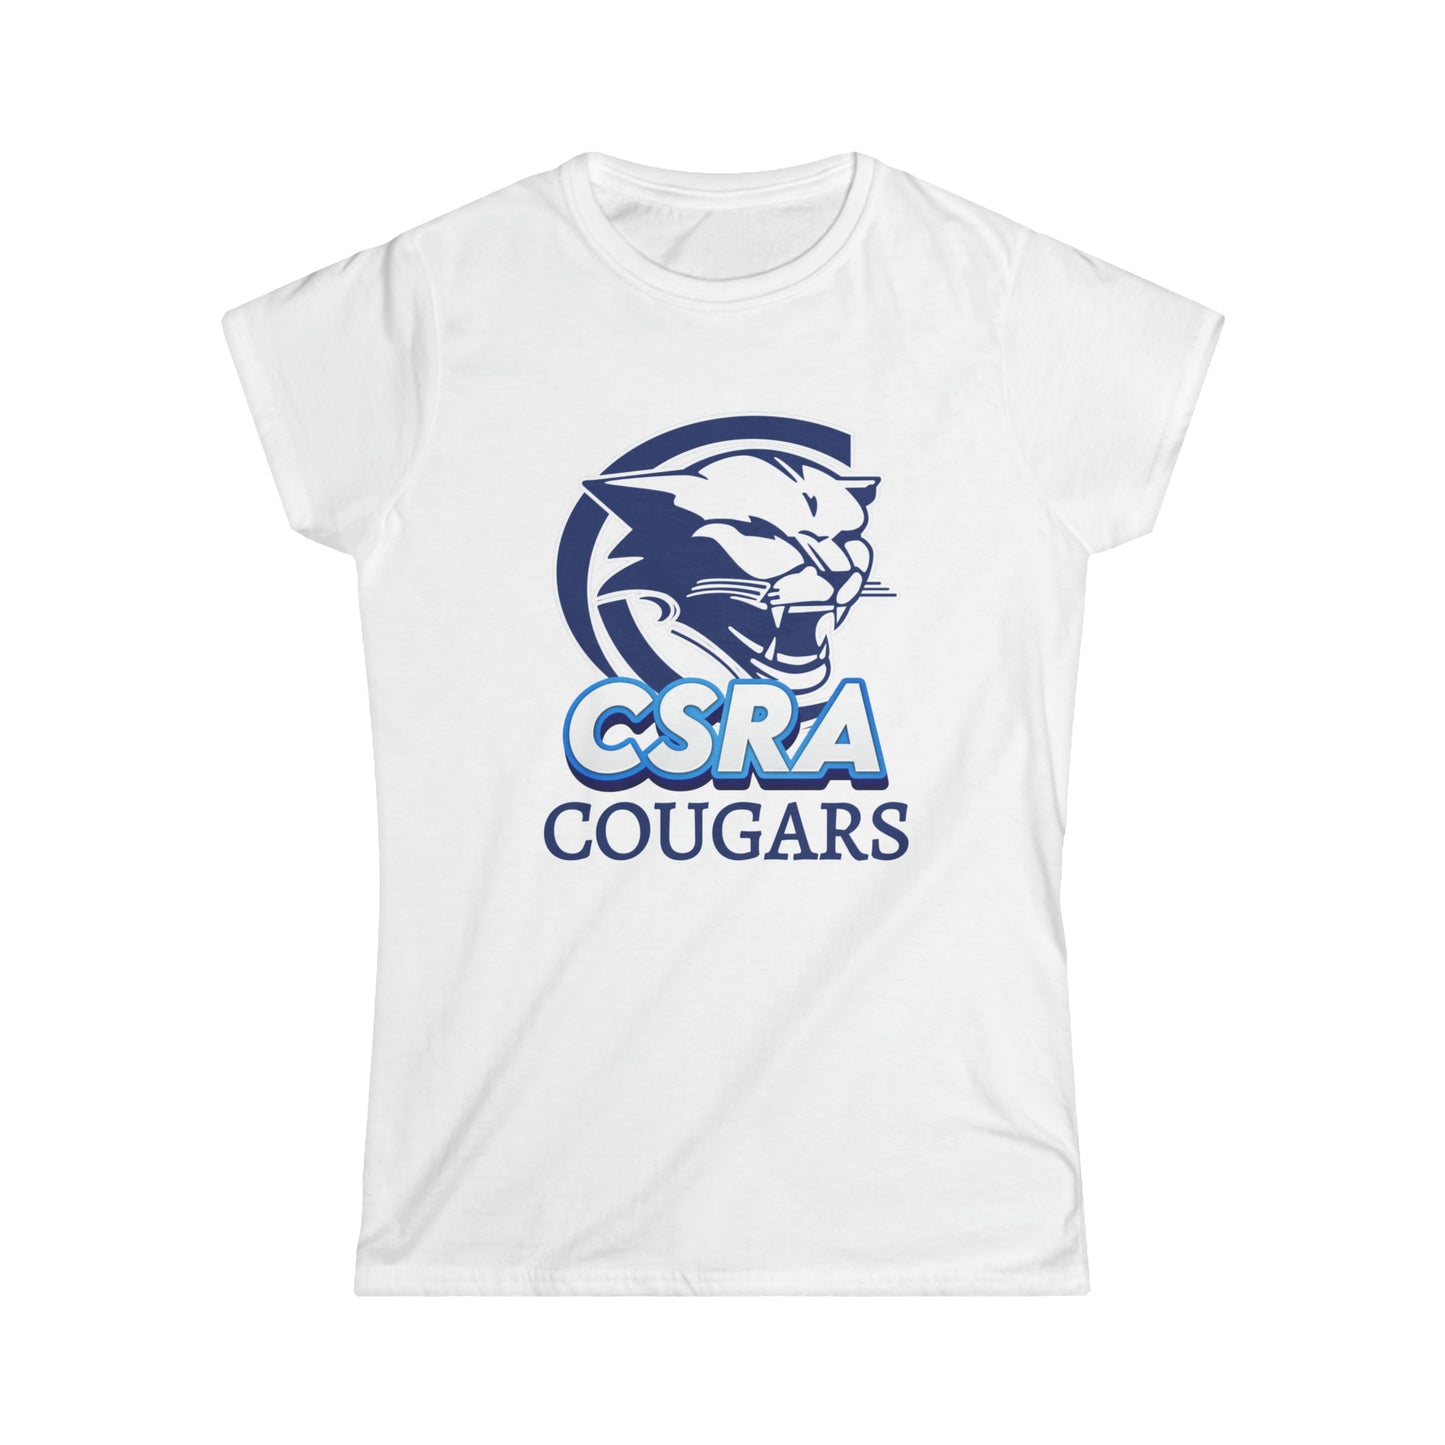 CSRA Cougars Women's Softstyle Tee